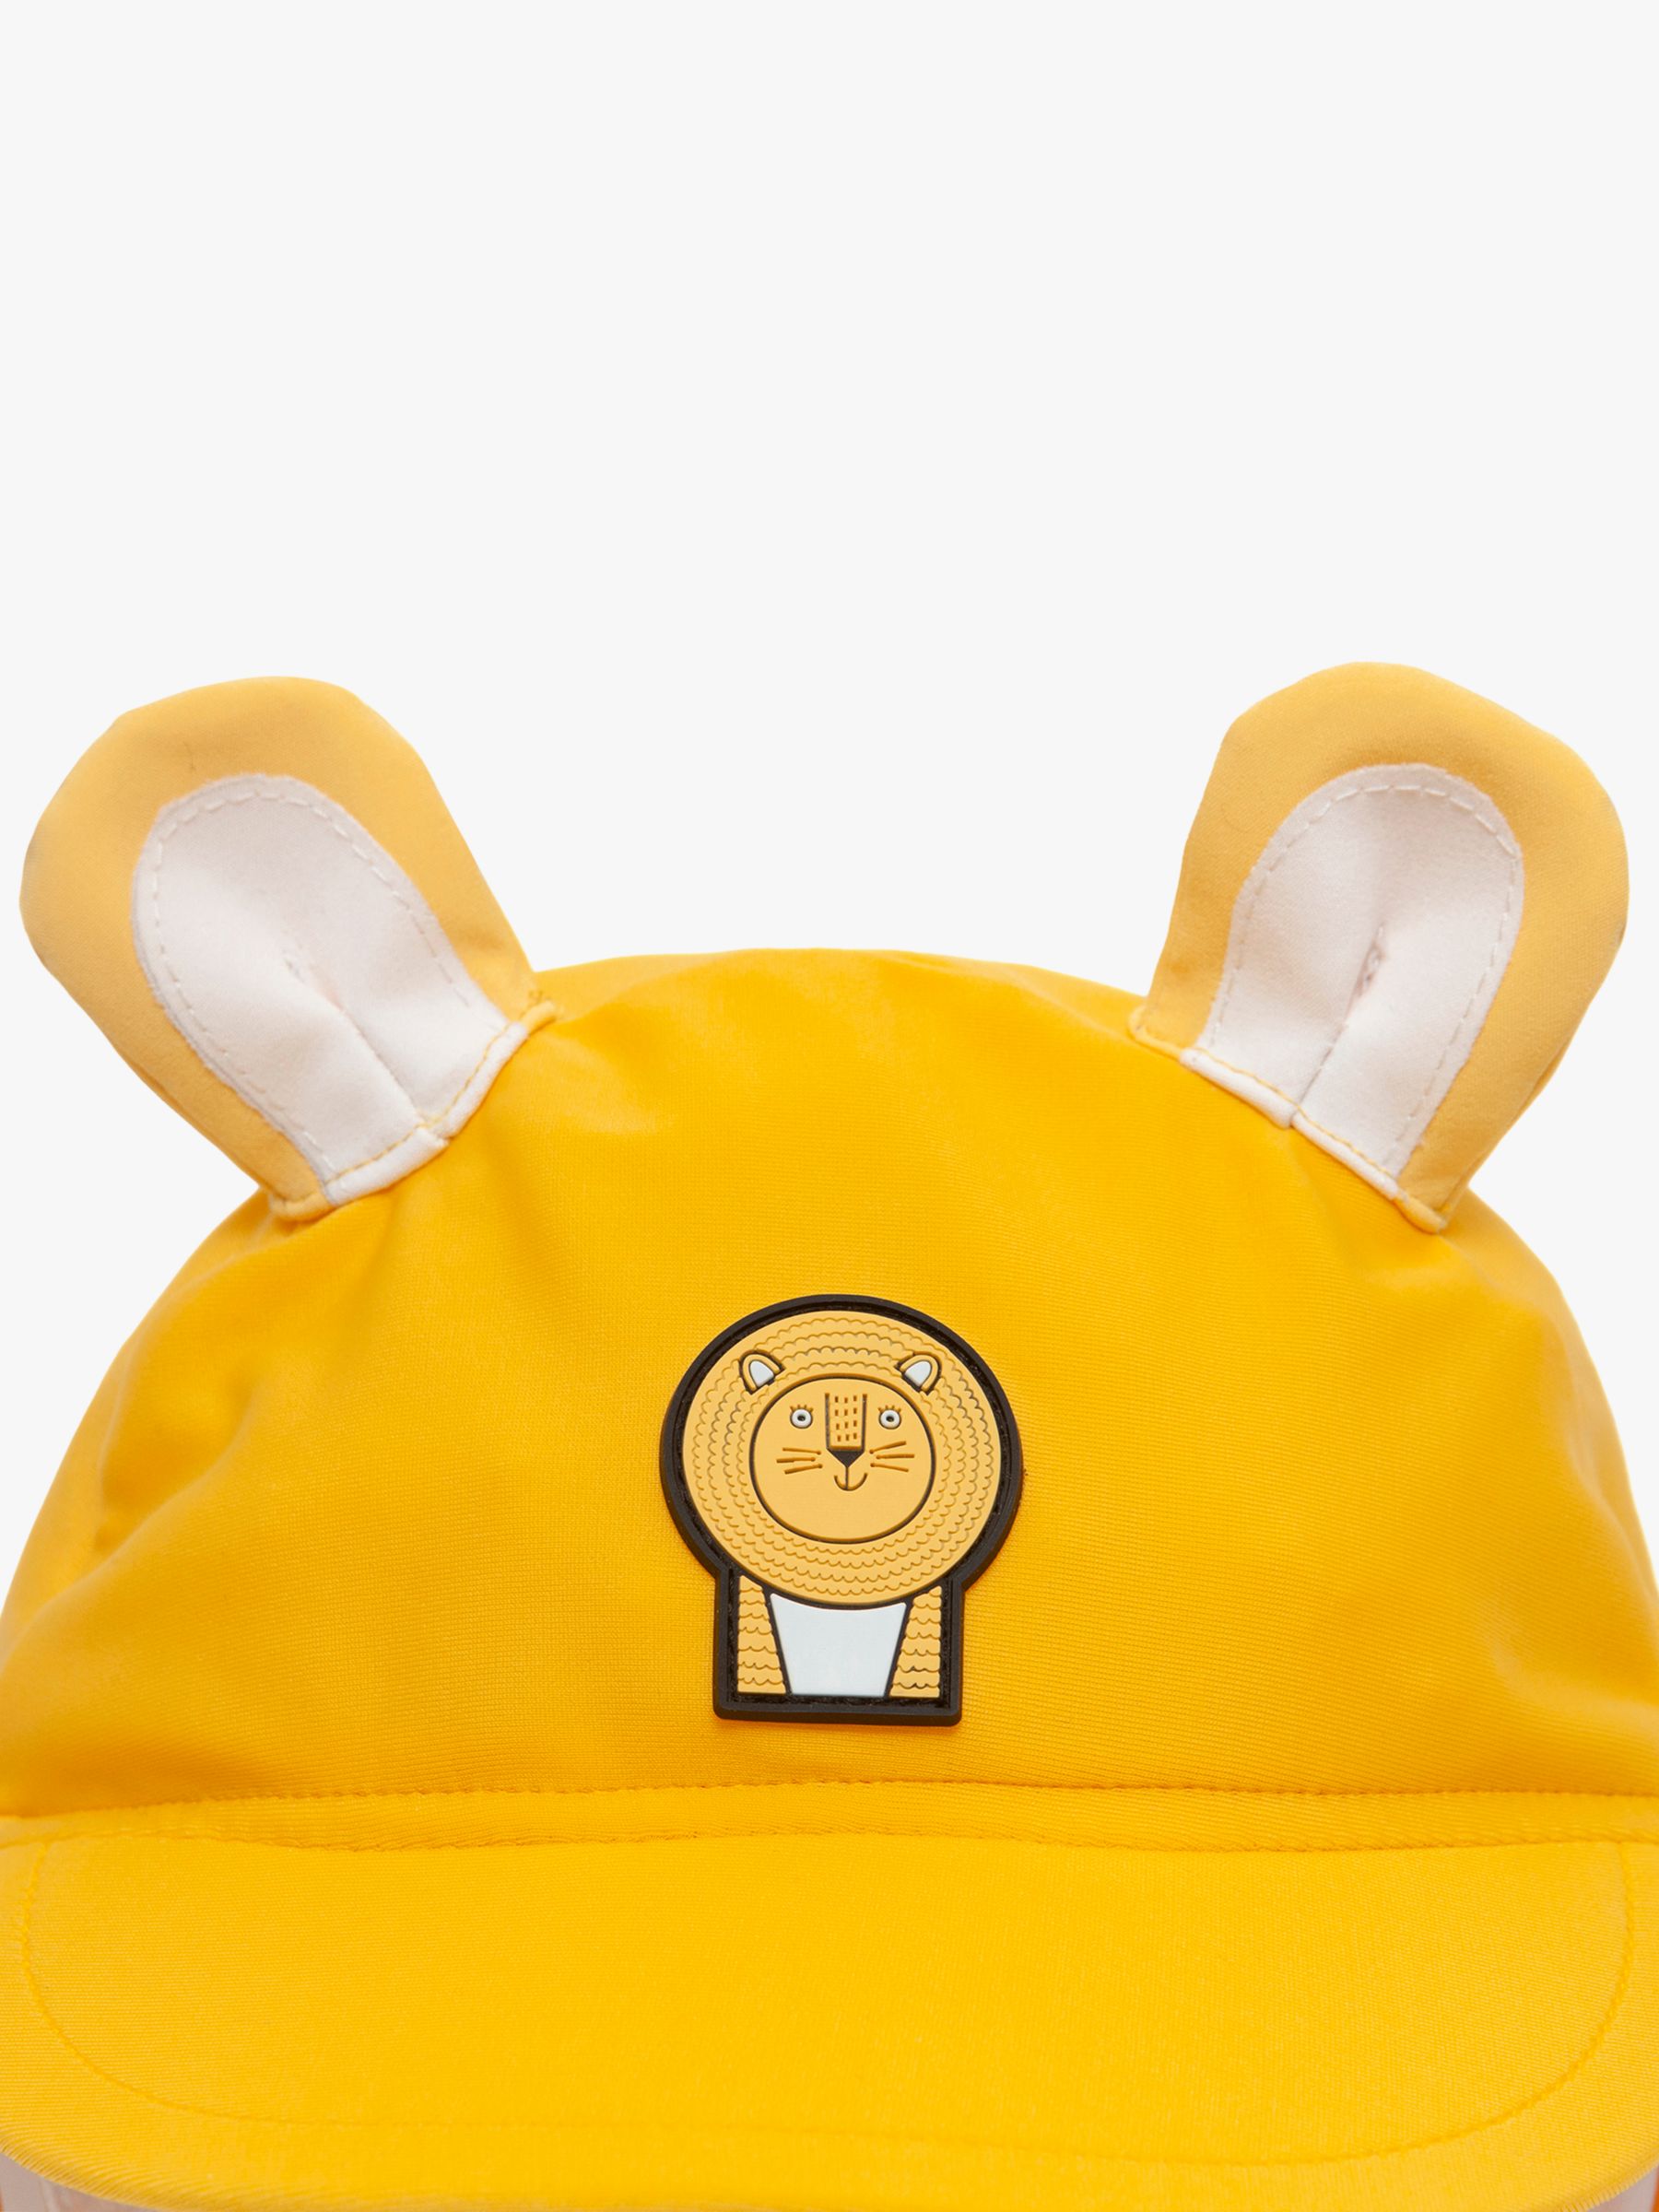 Roarsome Kids' Cub Summer Hat, Yellow, One Size